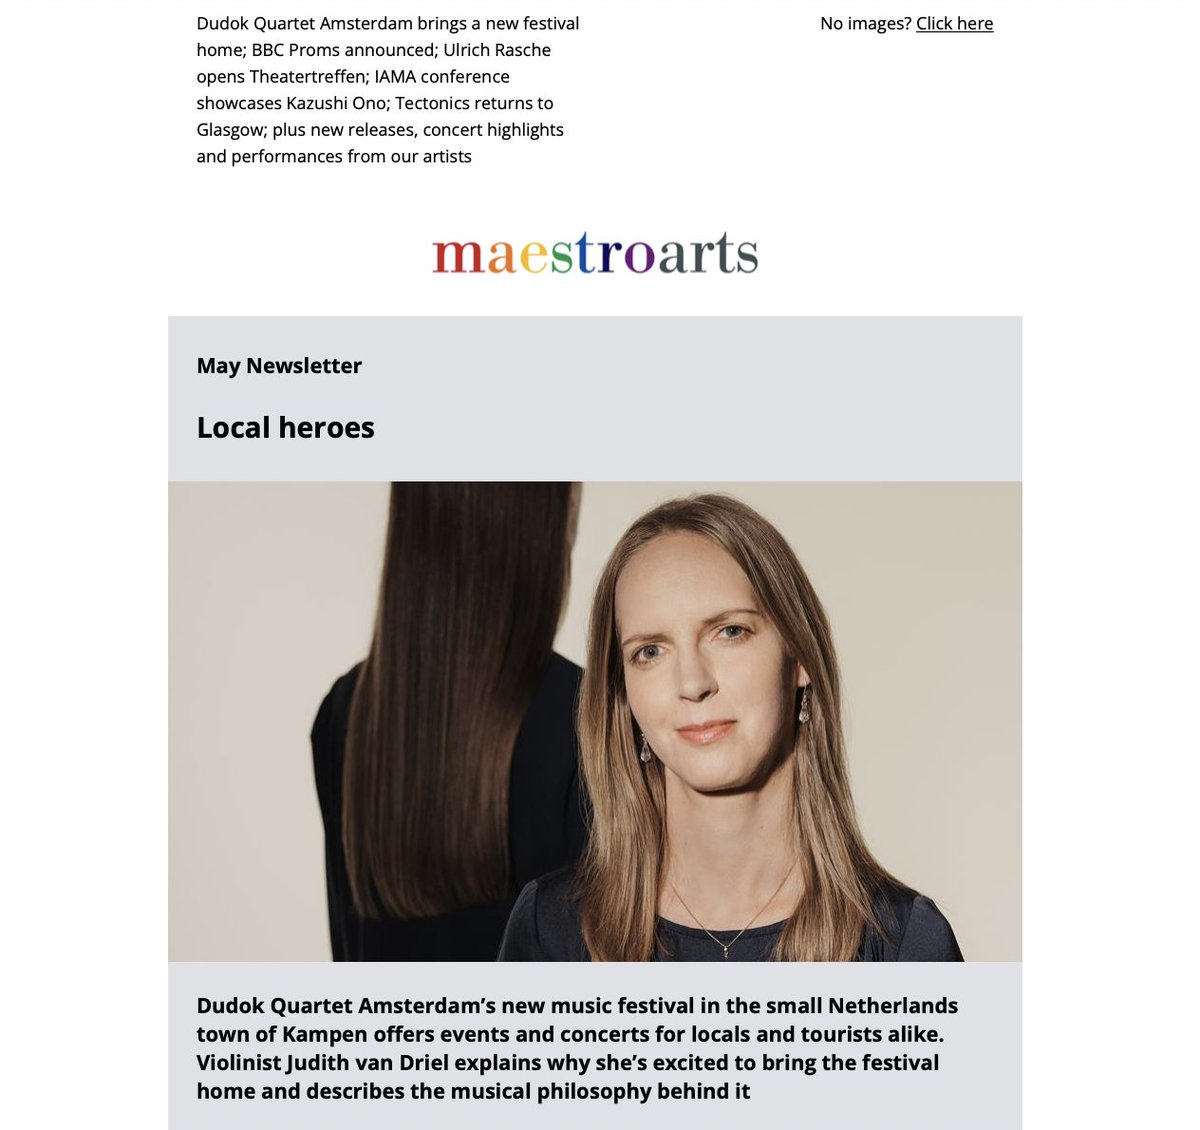 The May Maestro Arts newsletter is out! 🗞️ Featuring: Dudok Quartet Amsterdam's new festival; @bbcproms; Ulrich Rasche at Theatertreffen; Kazushi Ono at @IAMAworld conference; @tectonicsglas; plus new releases and concert highlights. Read all about it! 
createsend.com/t/i-F8770DE159…